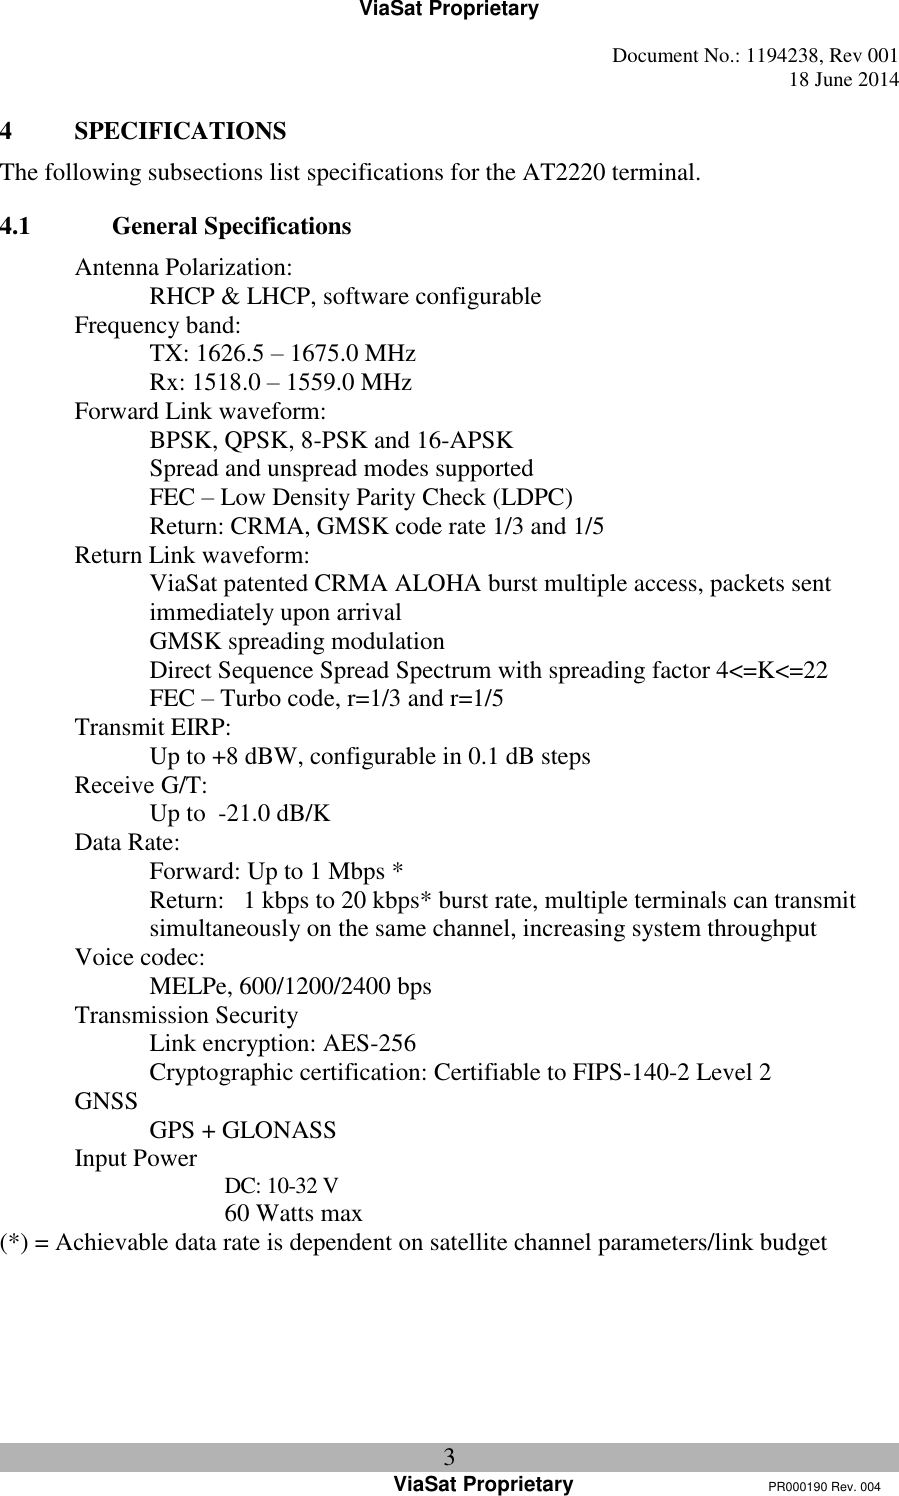 ViaSat Proprietary   Document No.: 1194238, Rev 001  18 June 2014 3 ViaSat Proprietary      PR000190 Rev. 004 4 SPECIFICATIONS The following subsections list specifications for the AT2220 terminal. 4.1 General Specifications Antenna Polarization:   RHCP &amp; LHCP, software configurable Frequency band:  TX: 1626.5 – 1675.0 MHz   Rx: 1518.0 – 1559.0 MHz Forward Link waveform:   BPSK, QPSK, 8-PSK and 16-APSK  Spread and unspread modes supported   FEC – Low Density Parity Check (LDPC)   Return: CRMA, GMSK code rate 1/3 and 1/5 Return Link waveform:   ViaSat patented CRMA ALOHA burst multiple access, packets sent immediately upon arrival  GMSK spreading modulation Direct Sequence Spread Spectrum with spreading factor 4&lt;=K&lt;=22   FEC – Turbo code, r=1/3 and r=1/5 Transmit EIRP:   Up to +8 dBW, configurable in 0.1 dB steps Receive G/T:   Up to  -21.0 dB/K Data Rate:   Forward: Up to 1 Mbps * Return:   1 kbps to 20 kbps* burst rate, multiple terminals can transmit simultaneously on the same channel, increasing system throughput Voice codec:   MELPe, 600/1200/2400 bps Transmission Security   Link encryption: AES-256   Cryptographic certification: Certifiable to FIPS-140-2 Level 2 GNSS   GPS + GLONASS Input Power     DC: 10-32 V     60 Watts max (*) = Achievable data rate is dependent on satellite channel parameters/link budget    